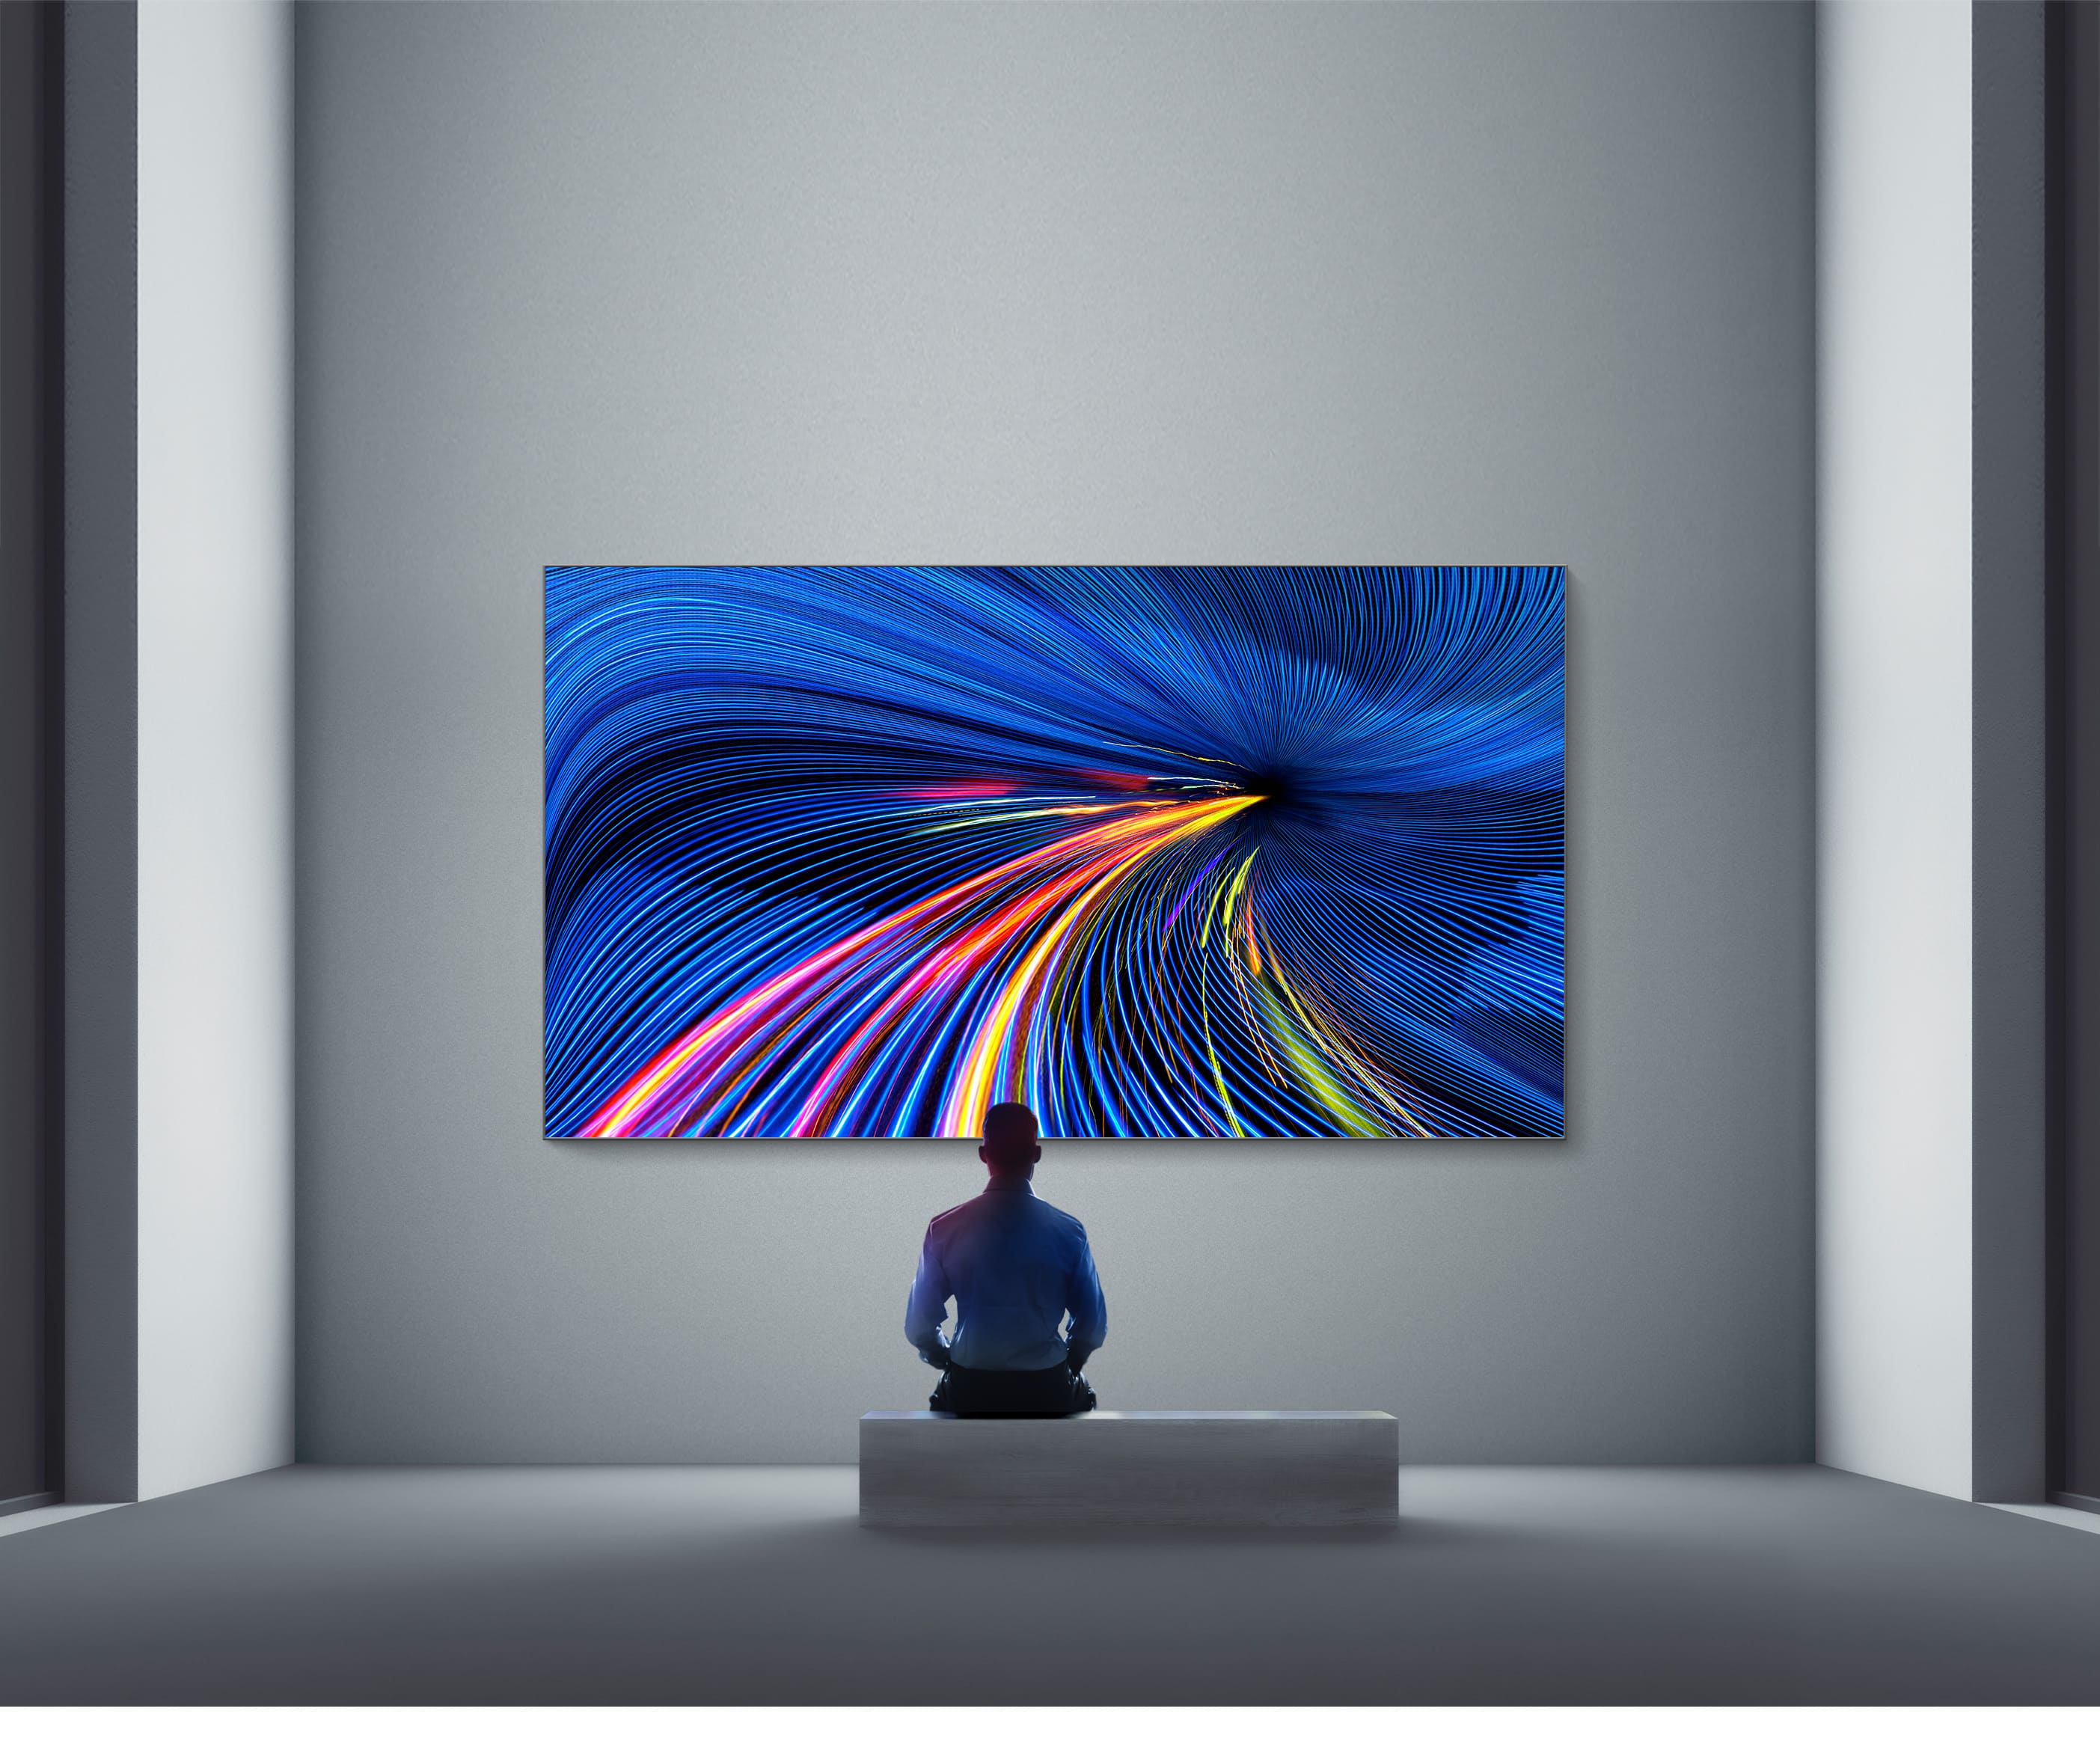 Samsung The Wall All-in-One IA012B - 110 inch LED wall - 1.26 mm PP - 500 cd/m² - Full-HD - 1920 x 1080 - LED display